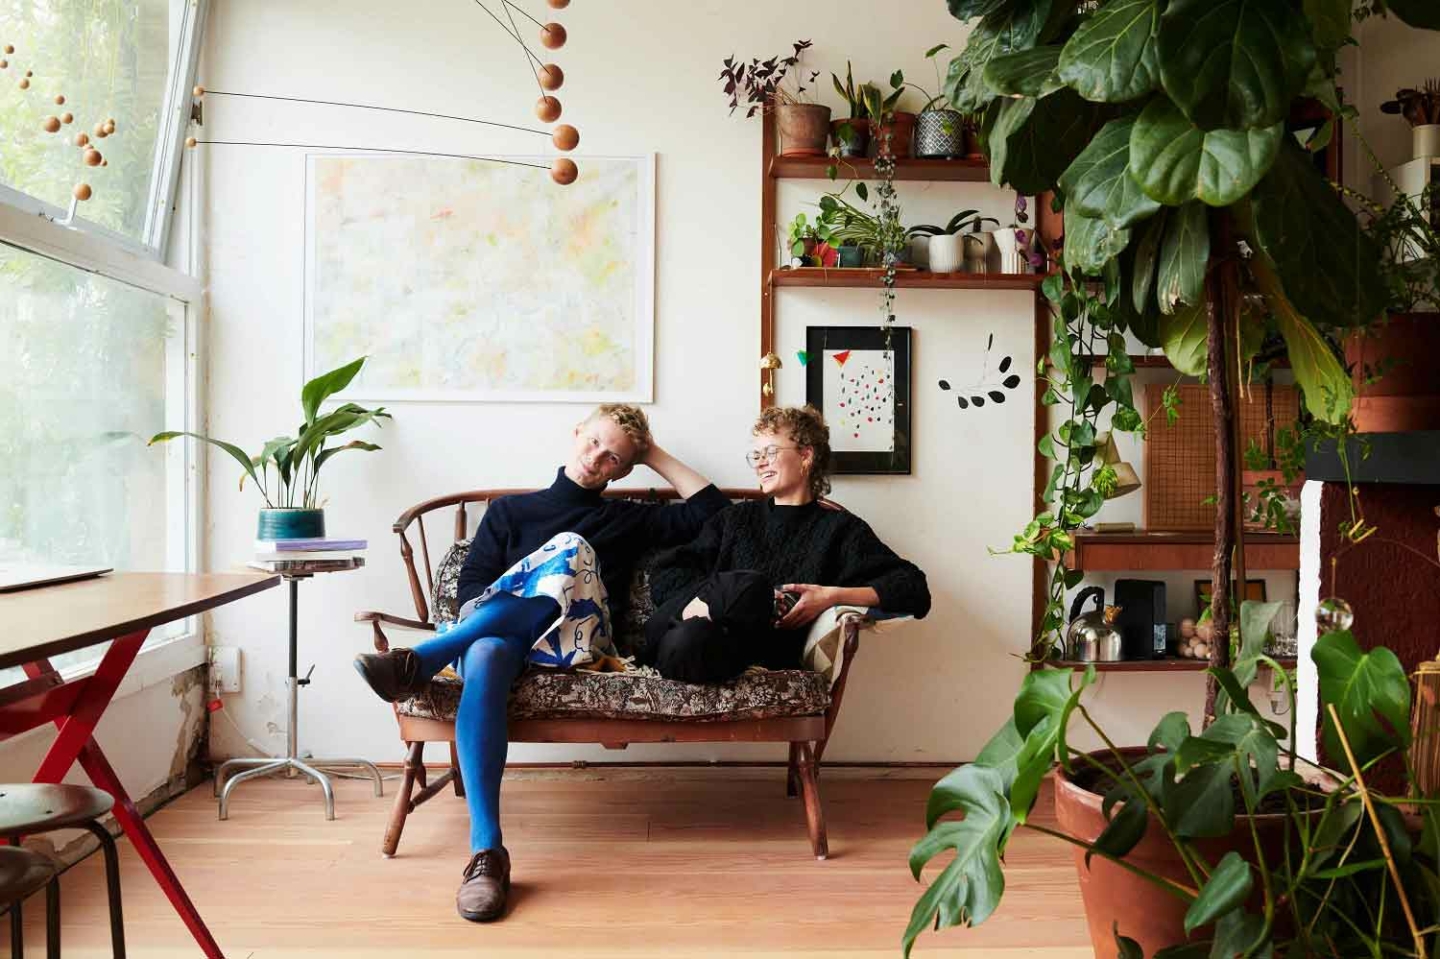 Two people sat on a sofa in a lounge, surrounded by plants